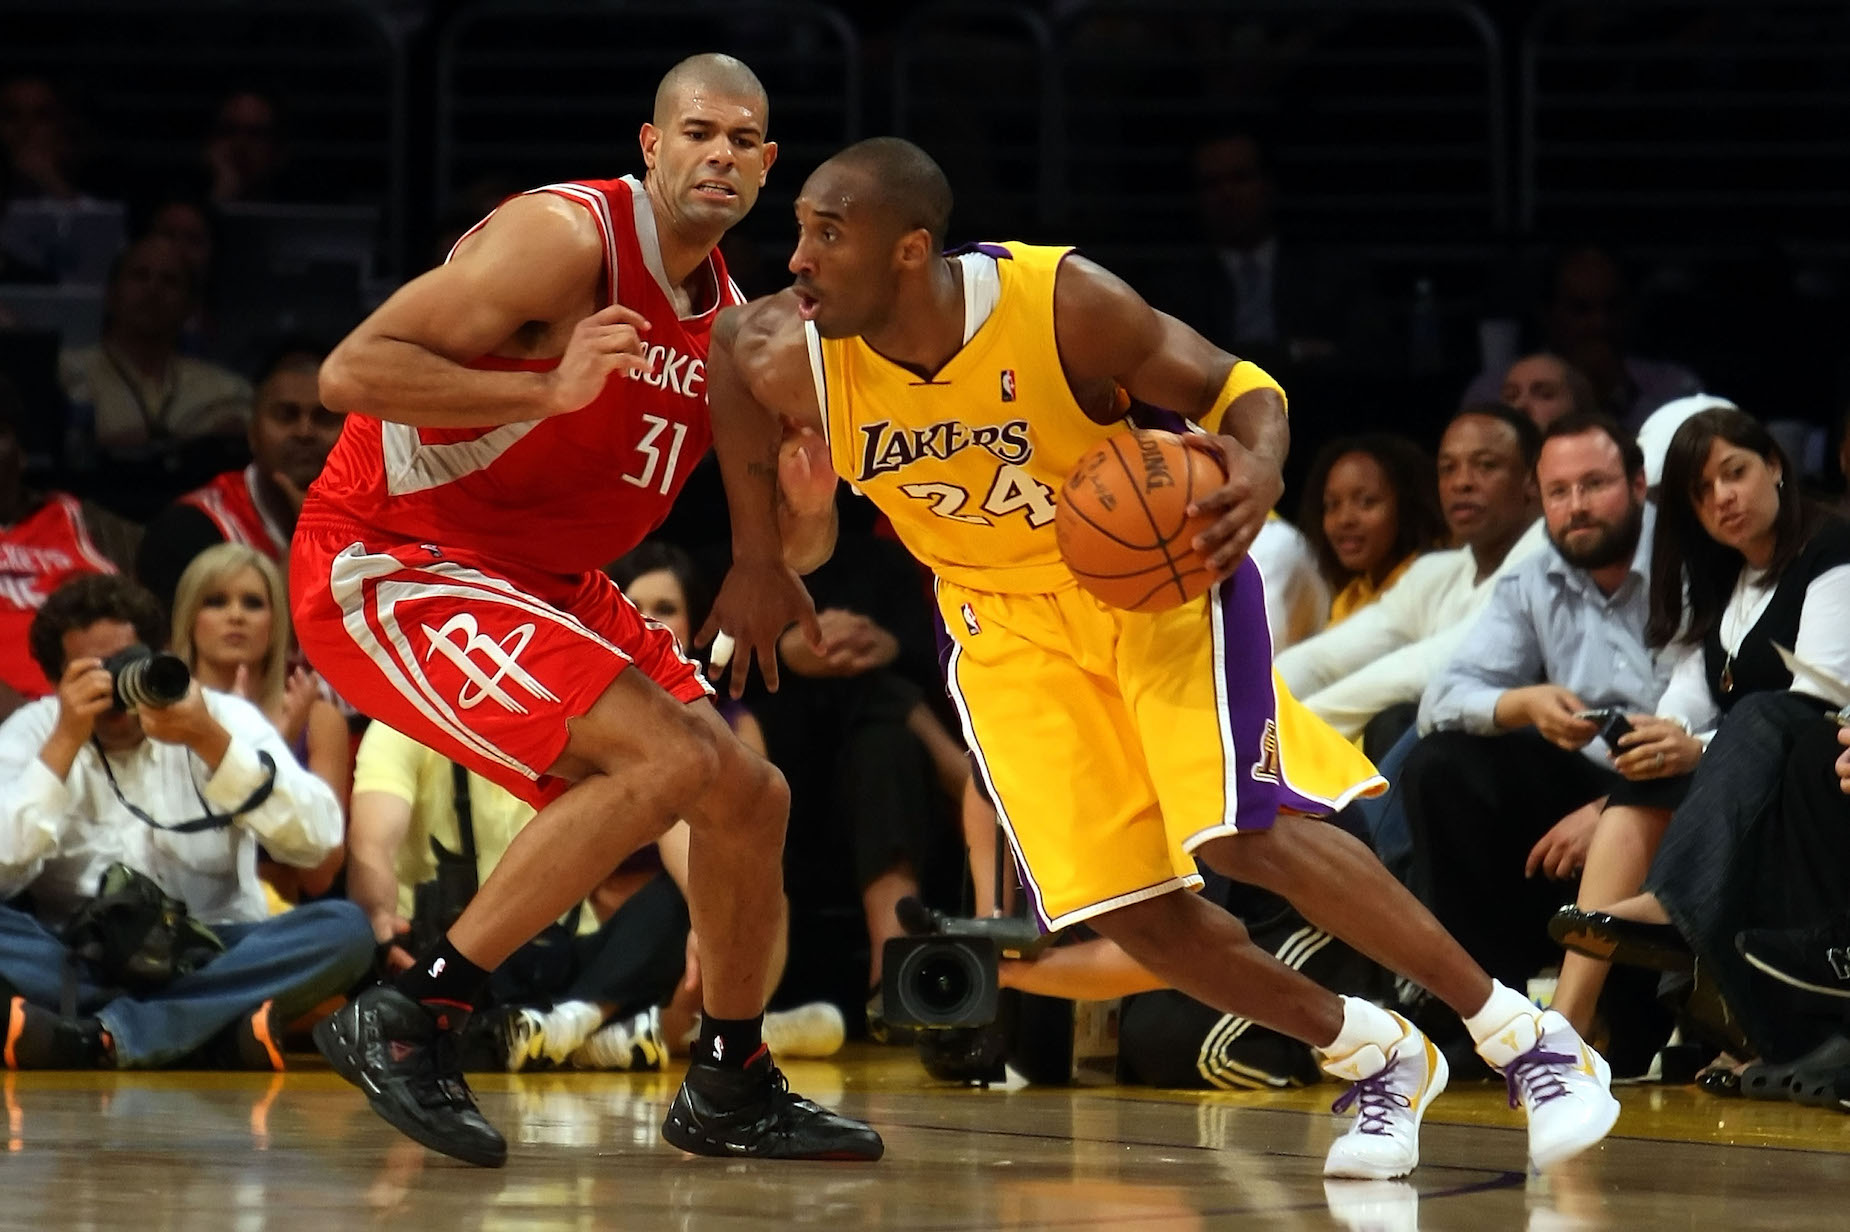 Shane Battier tried to defend against Kobe Bryant by taking advantage of his Mamba Mentality.